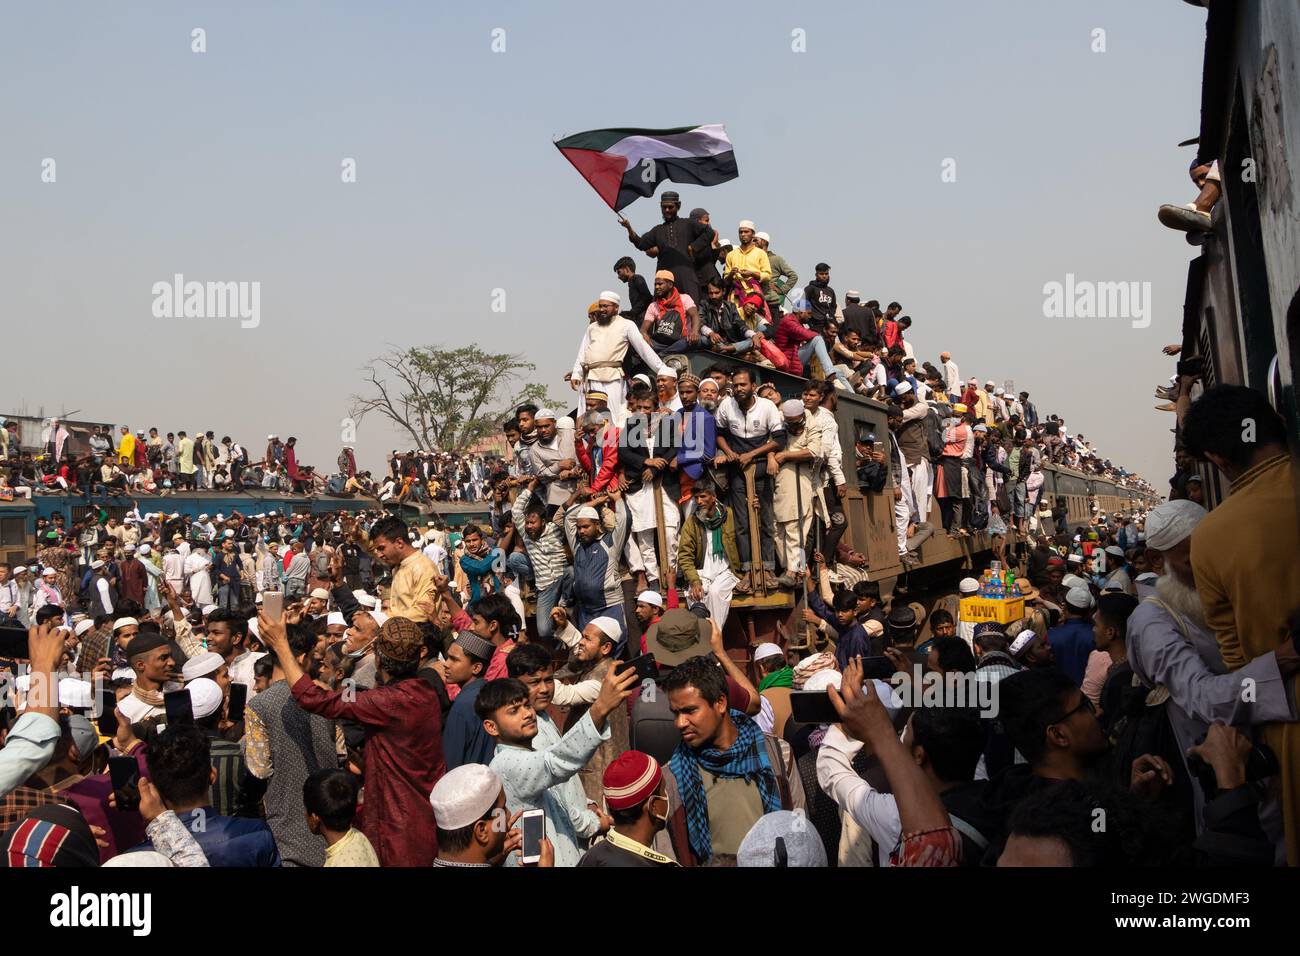 Tongi, Dhaka, Bangladesh. 4th Feb, 2024. Muslim devotees travel by overcrowded risky trains after attending the Akheri Munajat (final prayer) at the Biswa Ijtema in Tongi, Dhaka, Bangladesh. Locals tackle the journey by climbing on, clinging to, and clambering along the roofs of locomotives. With no seats available inside, many commuters decide to take the risk and choose a rooftop view for their journey out of Dhaka city. Credit: ZUMA Press, Inc./Alamy Live News Stock Photo